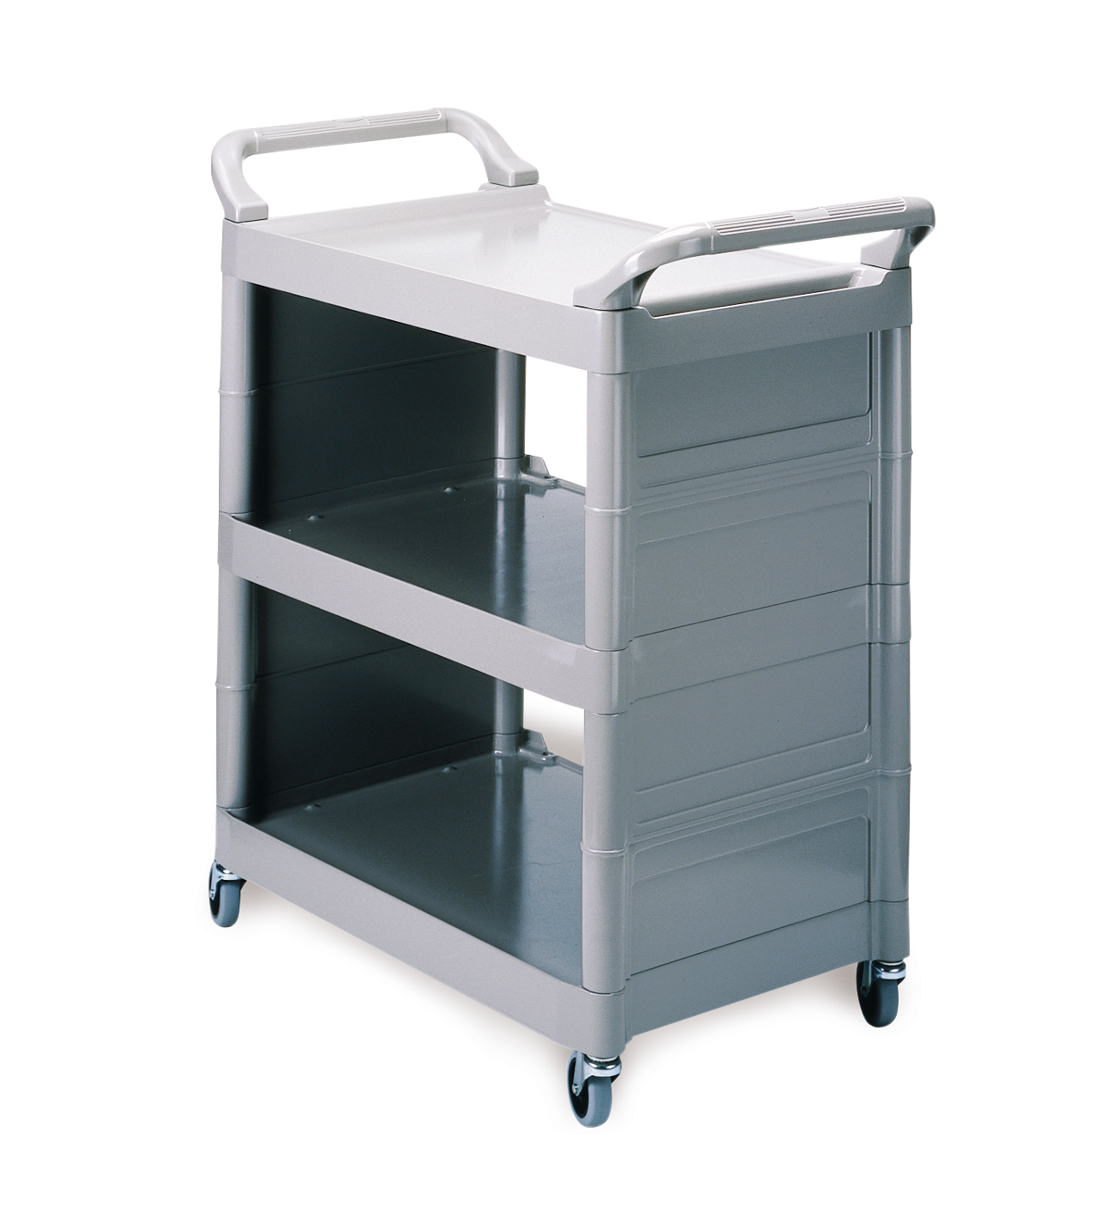 Rubbermaid, 3421 Utility Cart, Service Carts